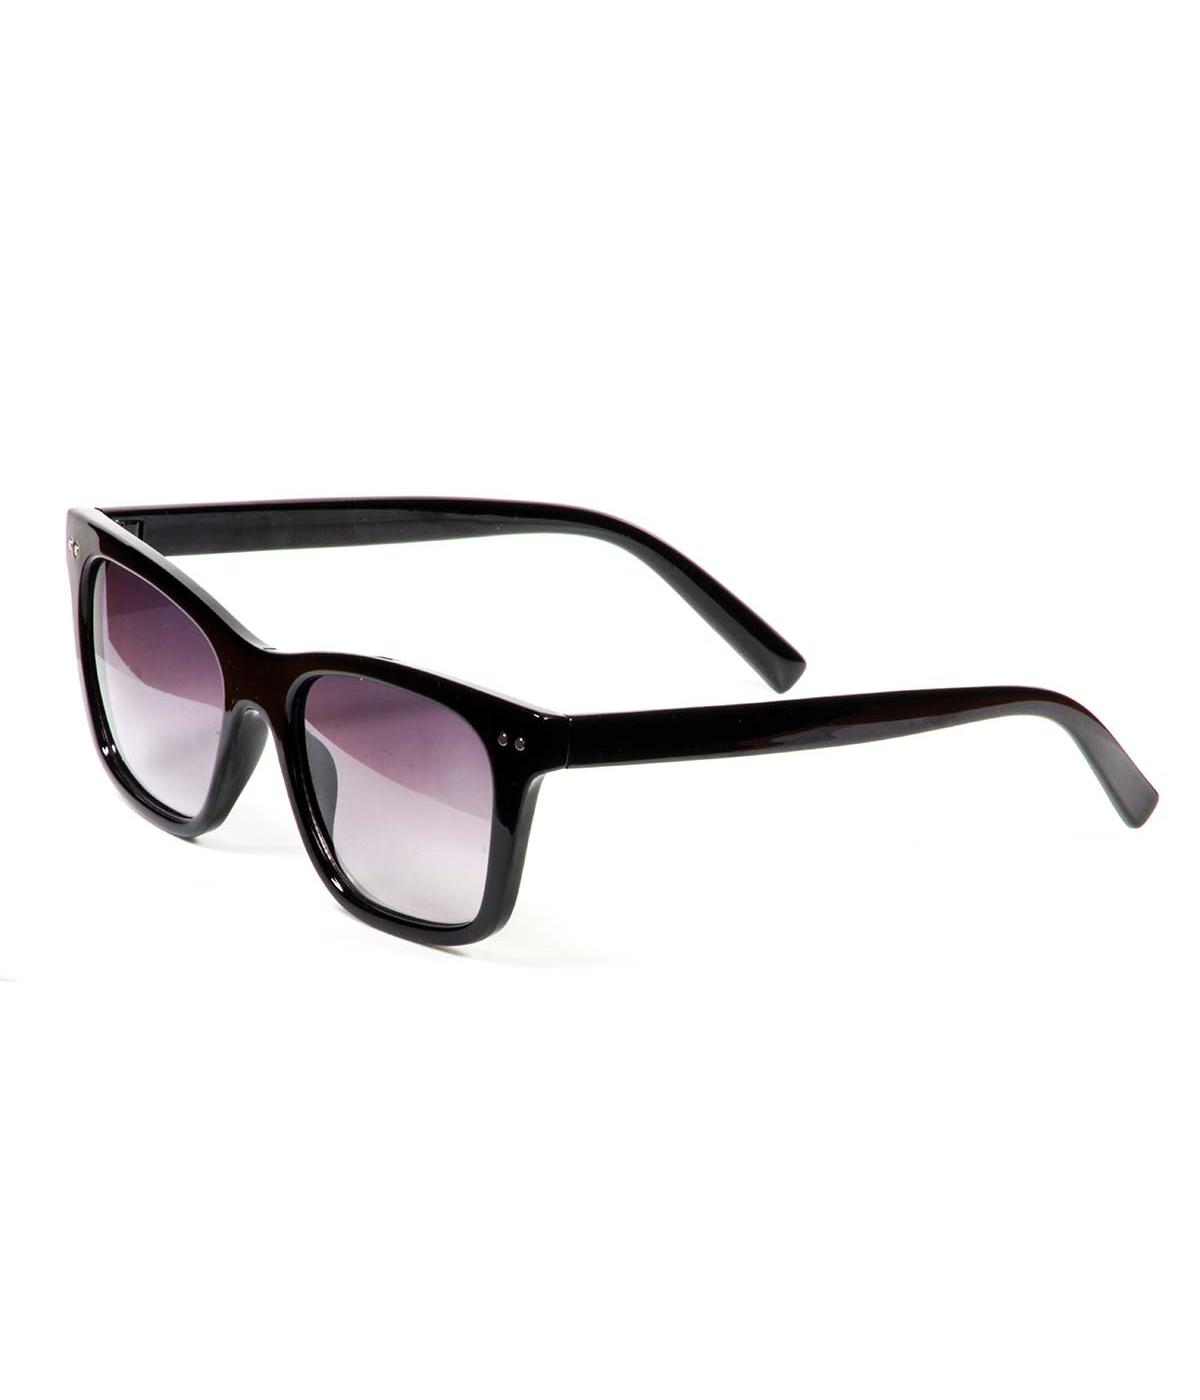 Select A Vision Women's Mod Rectangle Sunglasses; image 1 of 2